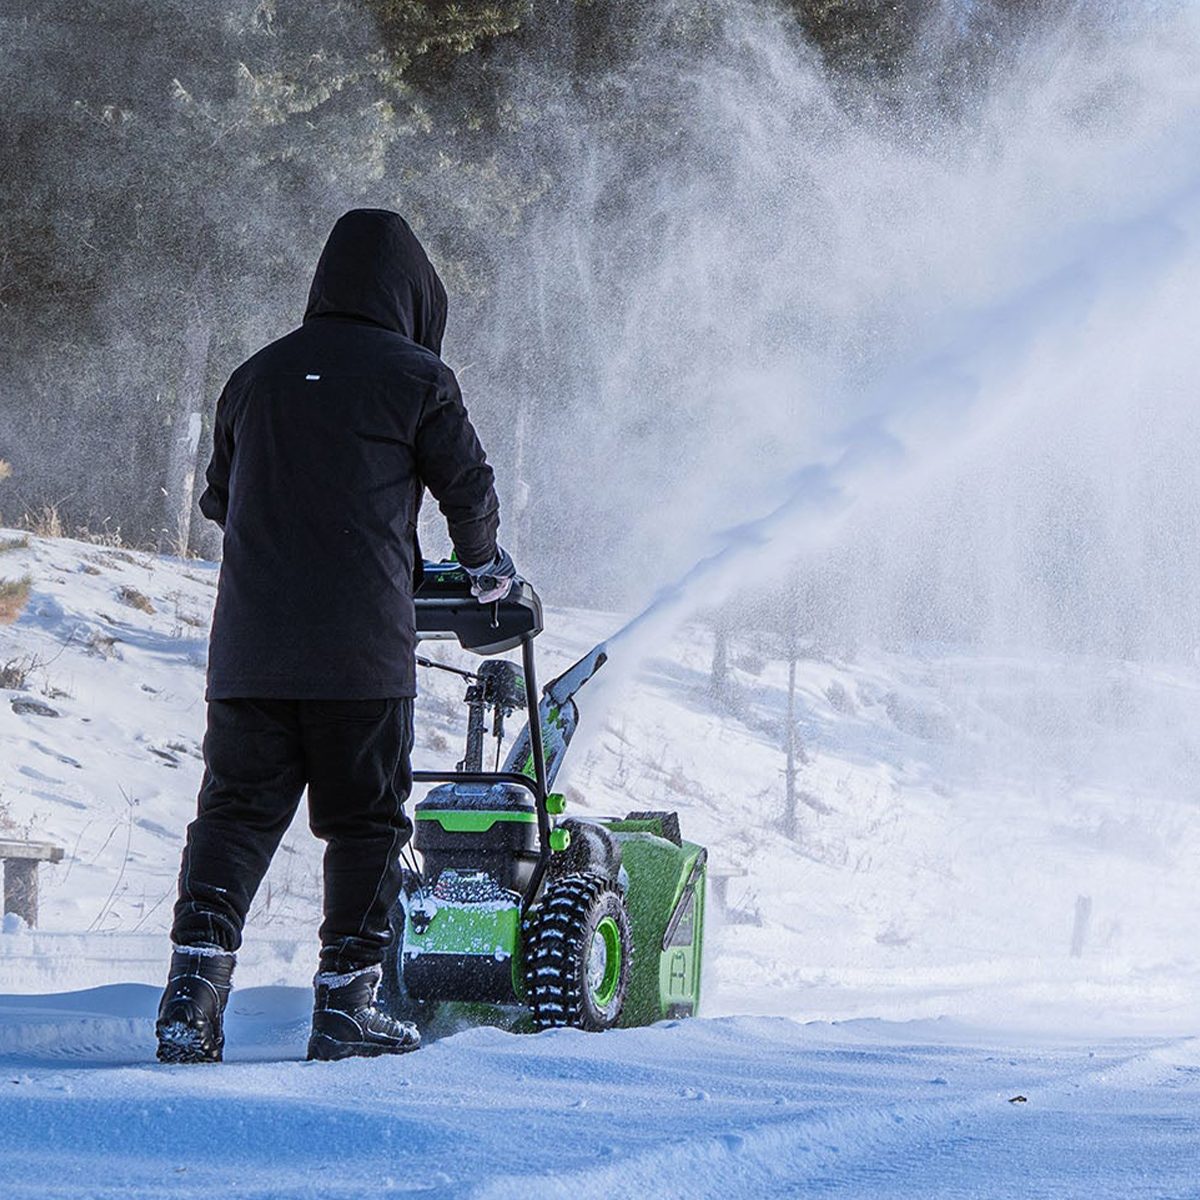 The Best Small 2-stage Snow Blower For You! Fall 2019 